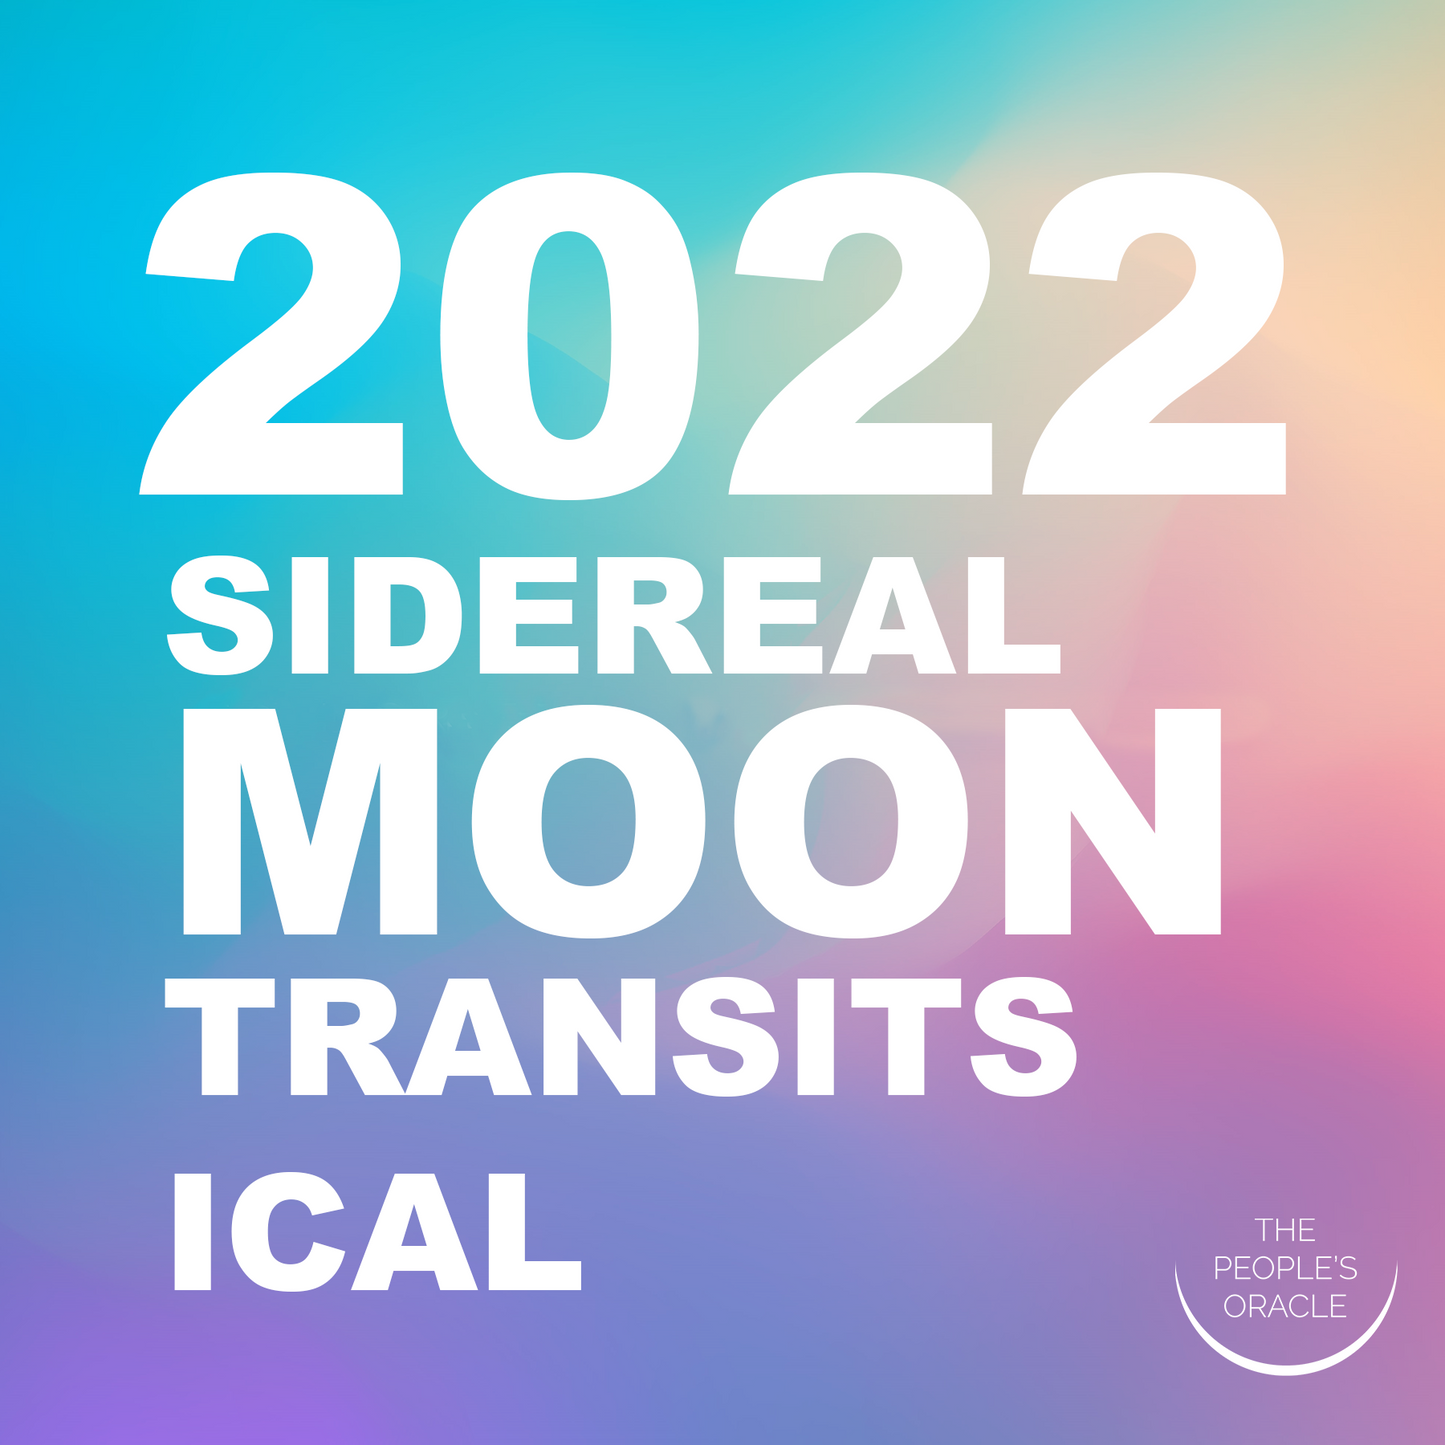 2022 Sidereal Moon Transits iCal